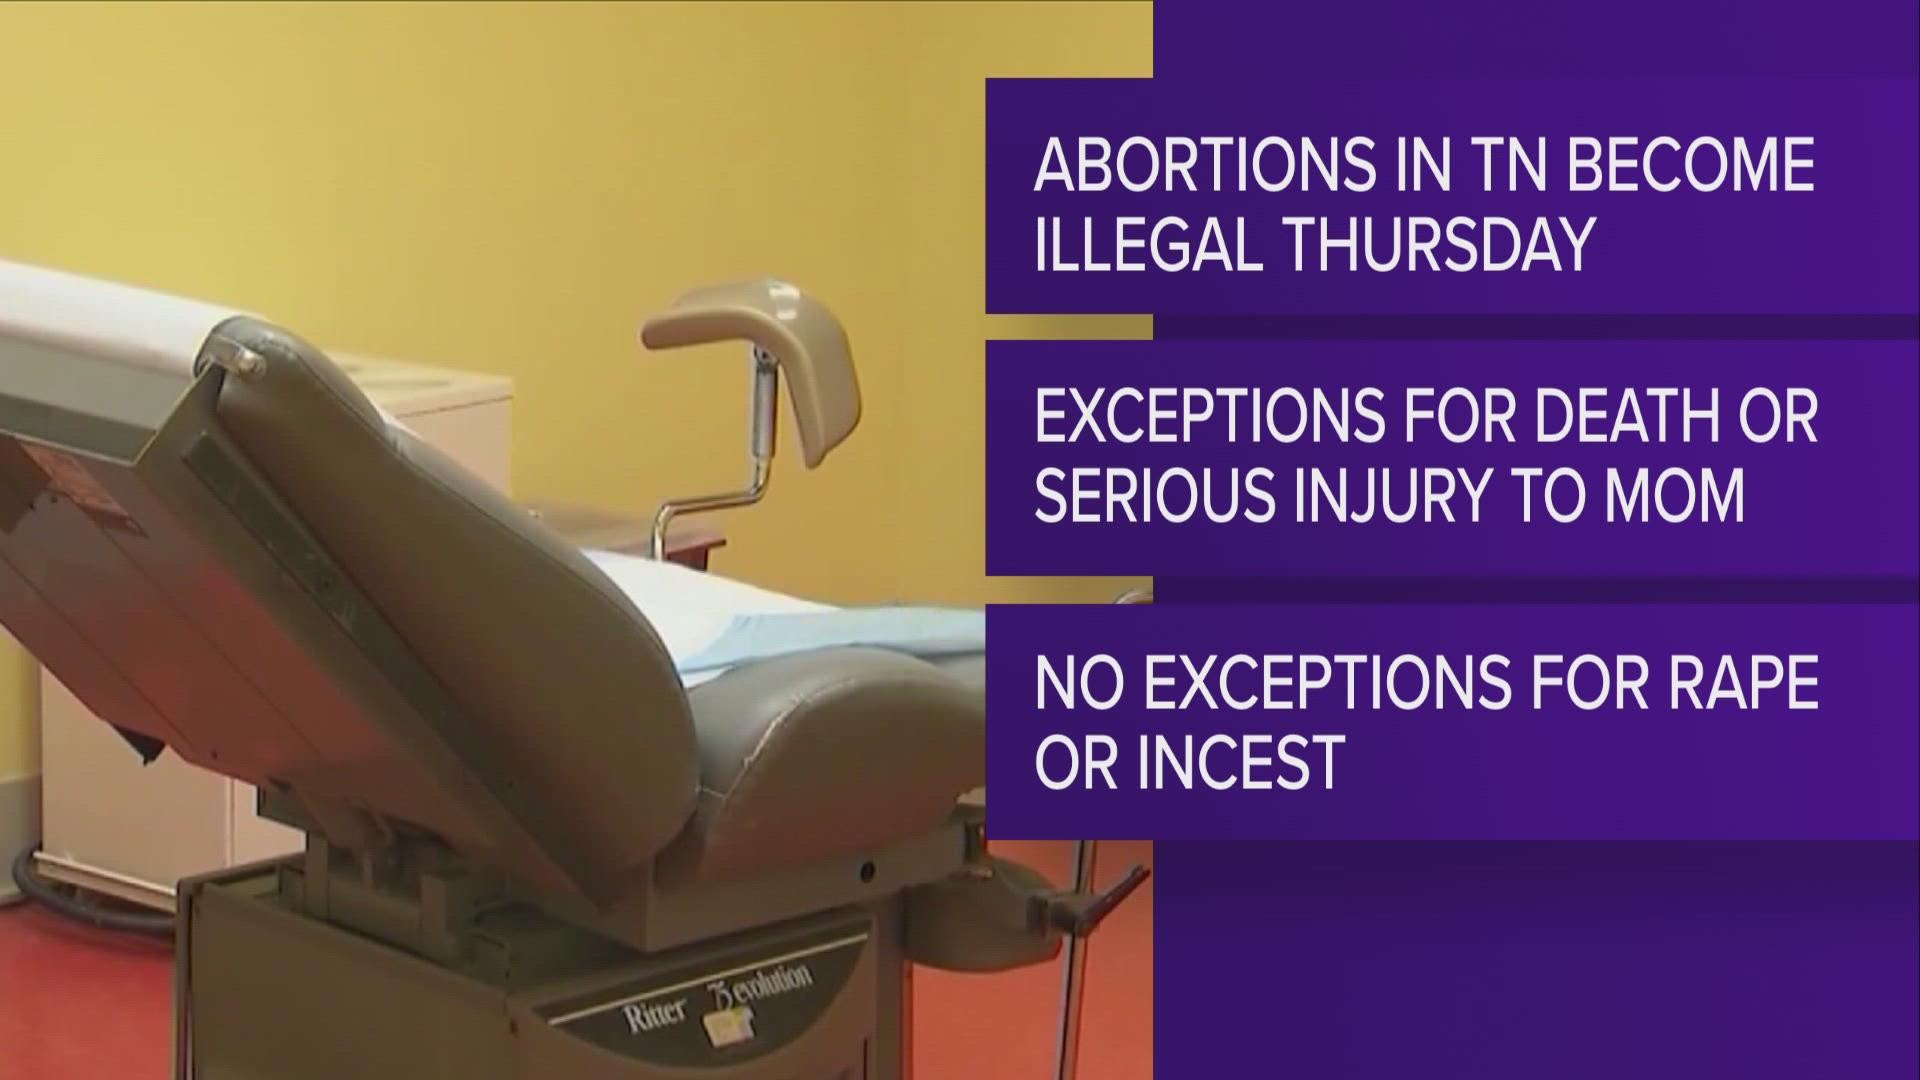 The state legislature passed The Human Life Protection Act in 2019, which makes providing abortion treatments a felony in the state.